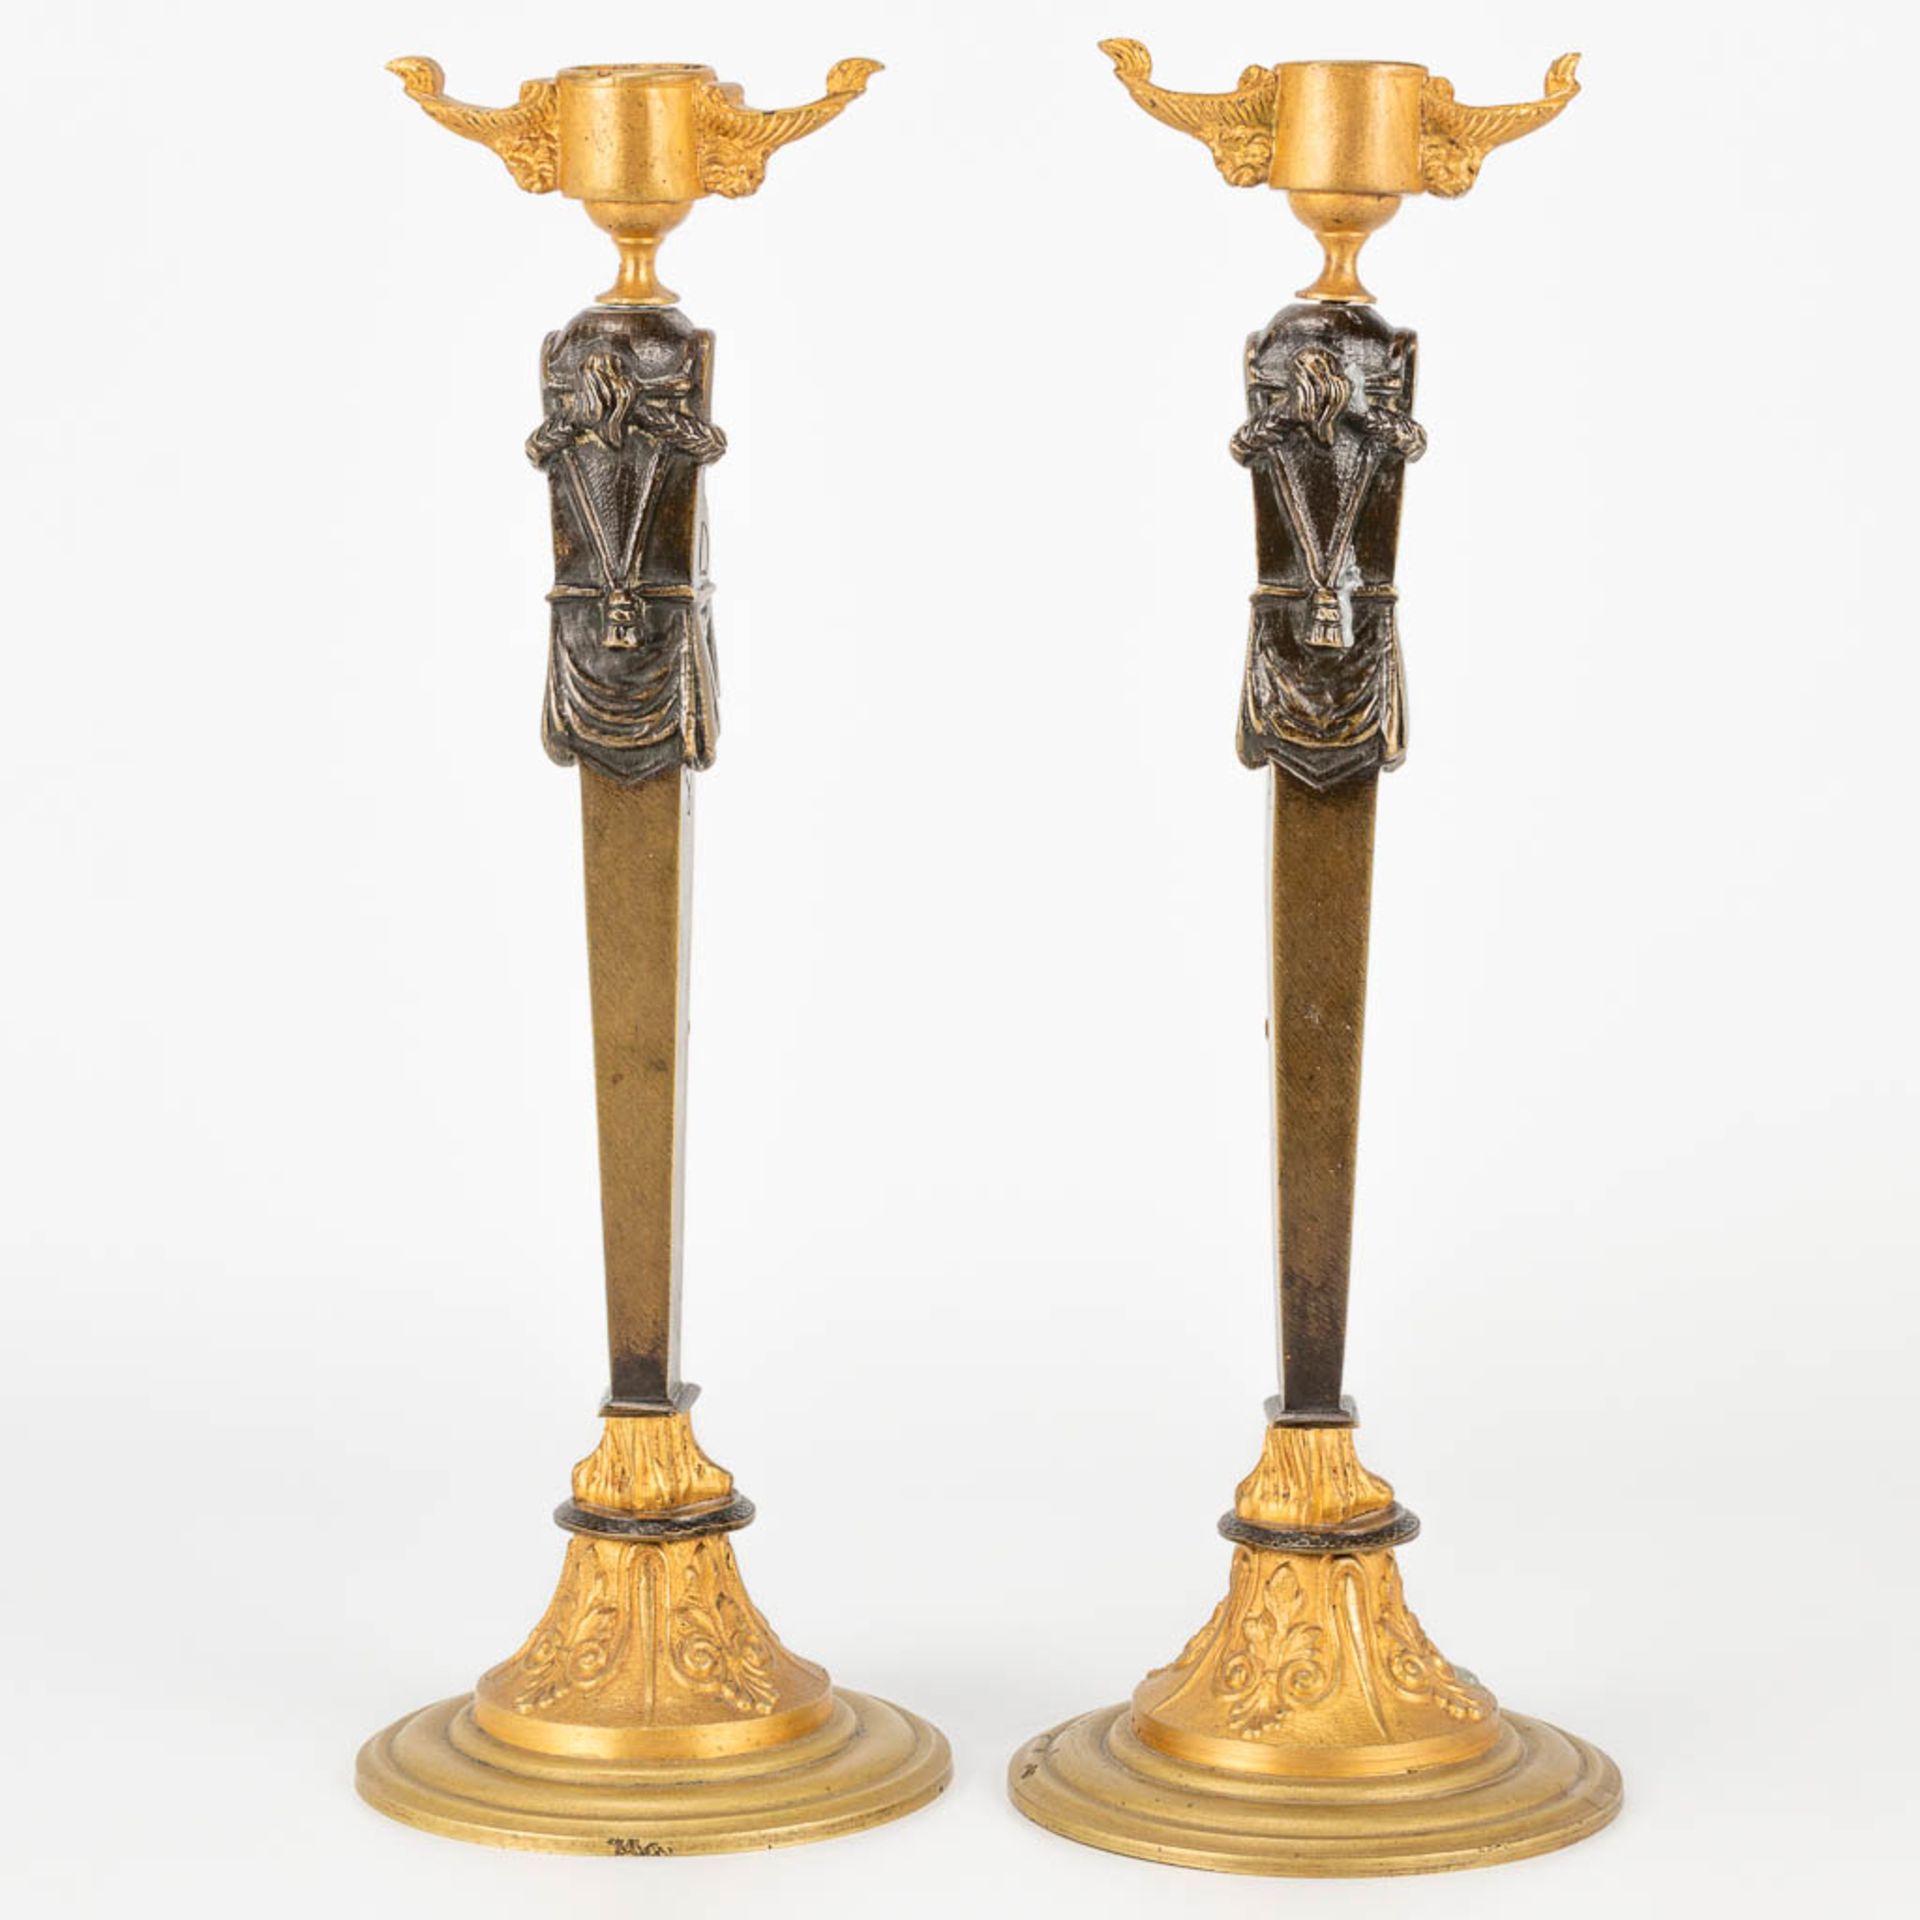 A pair of candlesticks made of gilt and patinated bronze in empire style. (27,5 x 9,5 cm) - Image 5 of 15